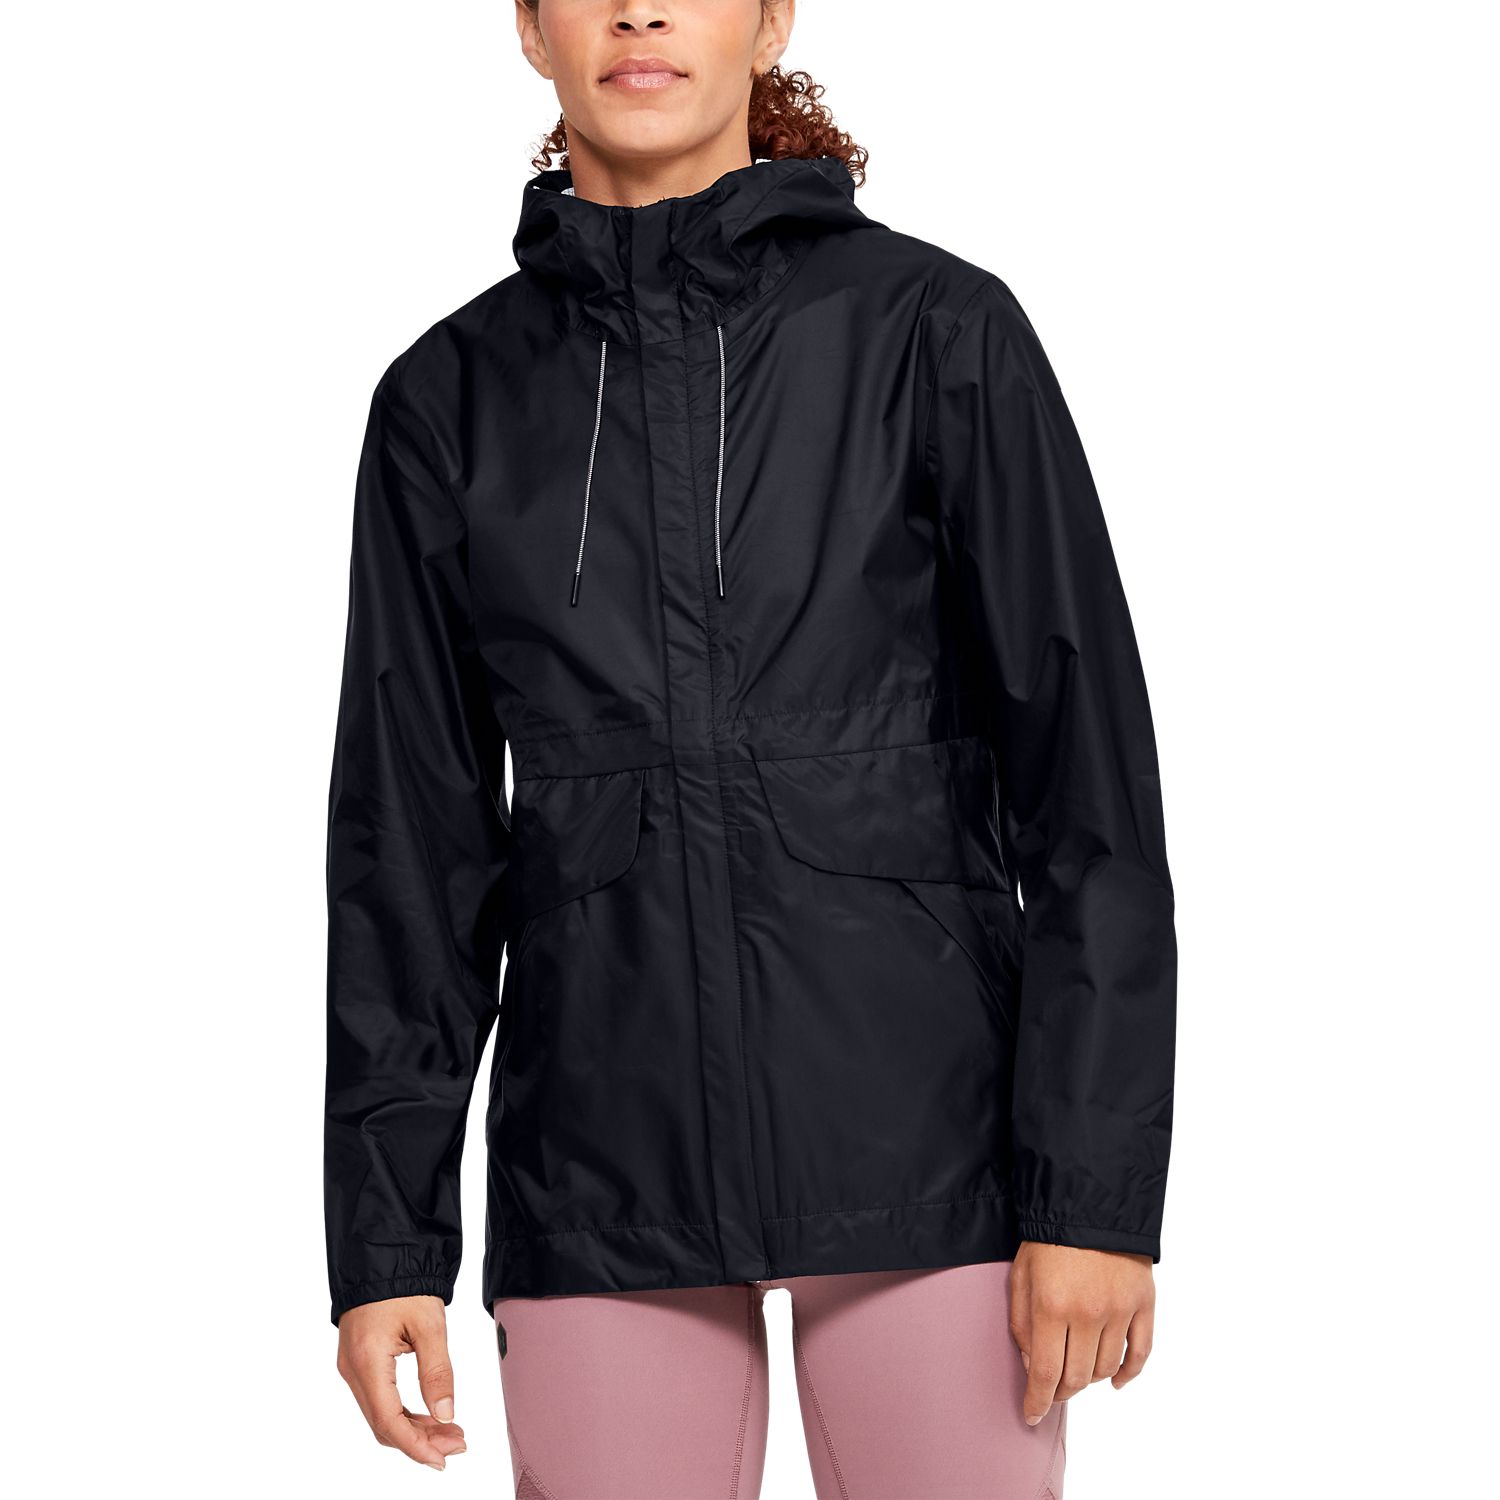 women's under armour jacket with hood